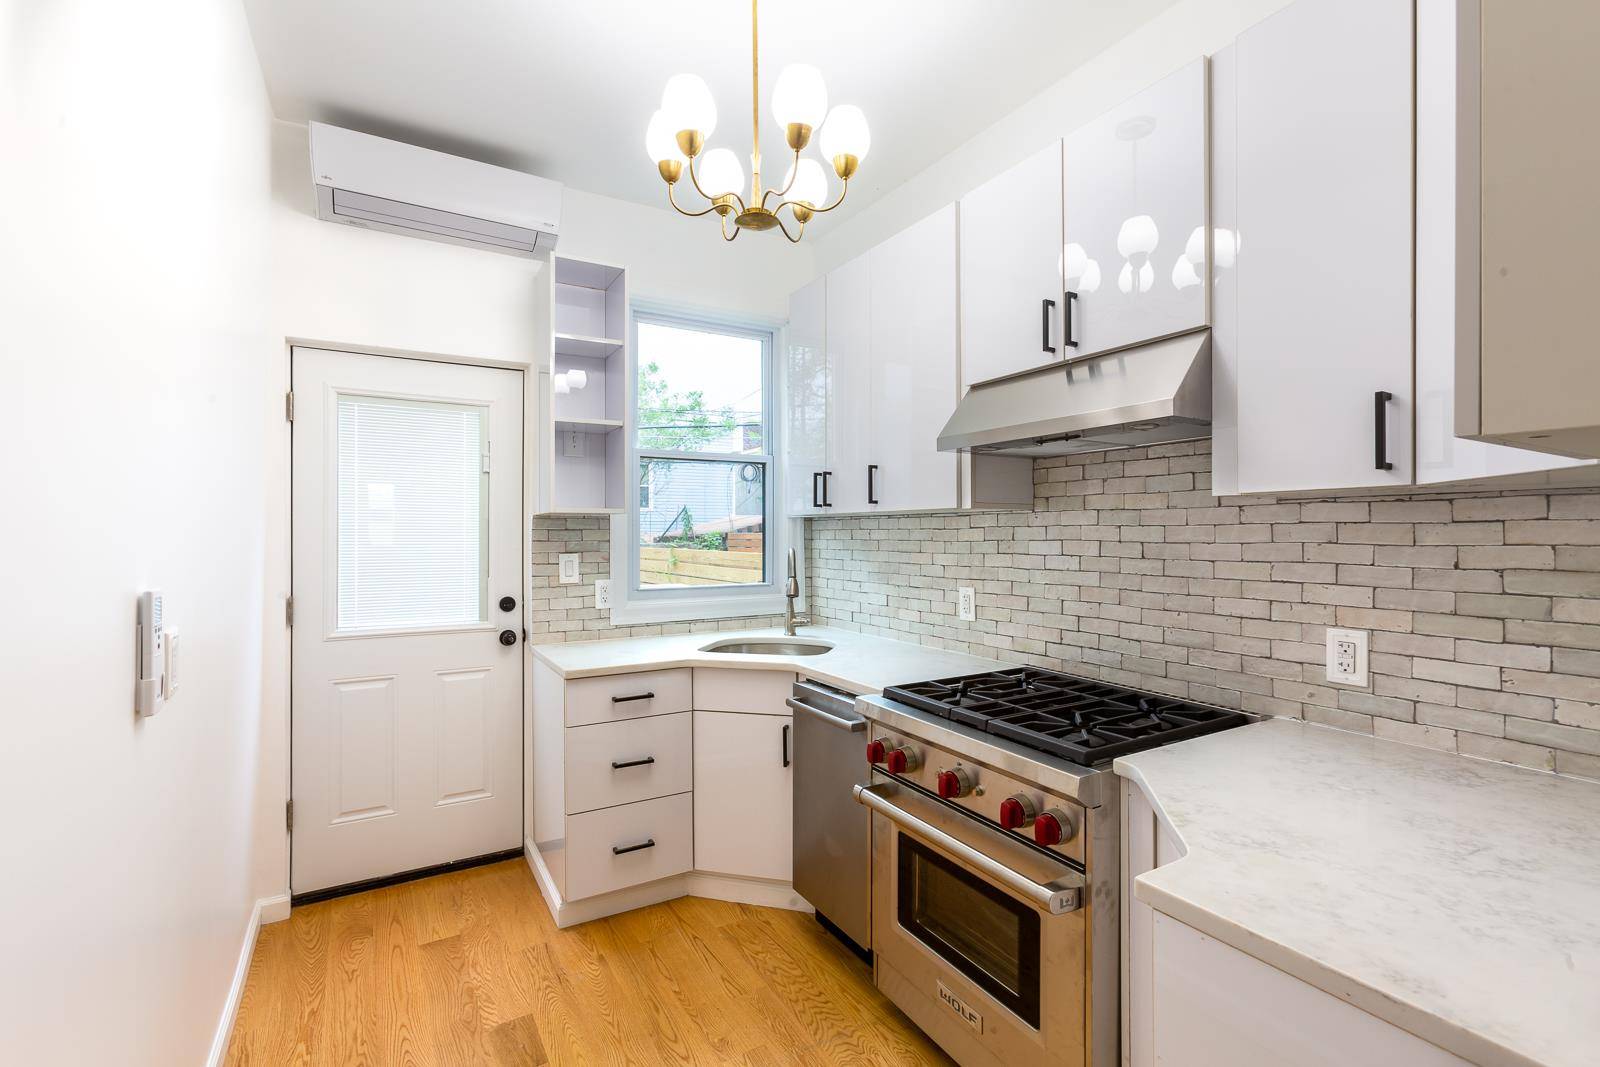 Welcome to 988 Willoughby Avenue, a recently renovated, three bedroom duplex in the heart of Bushwick.